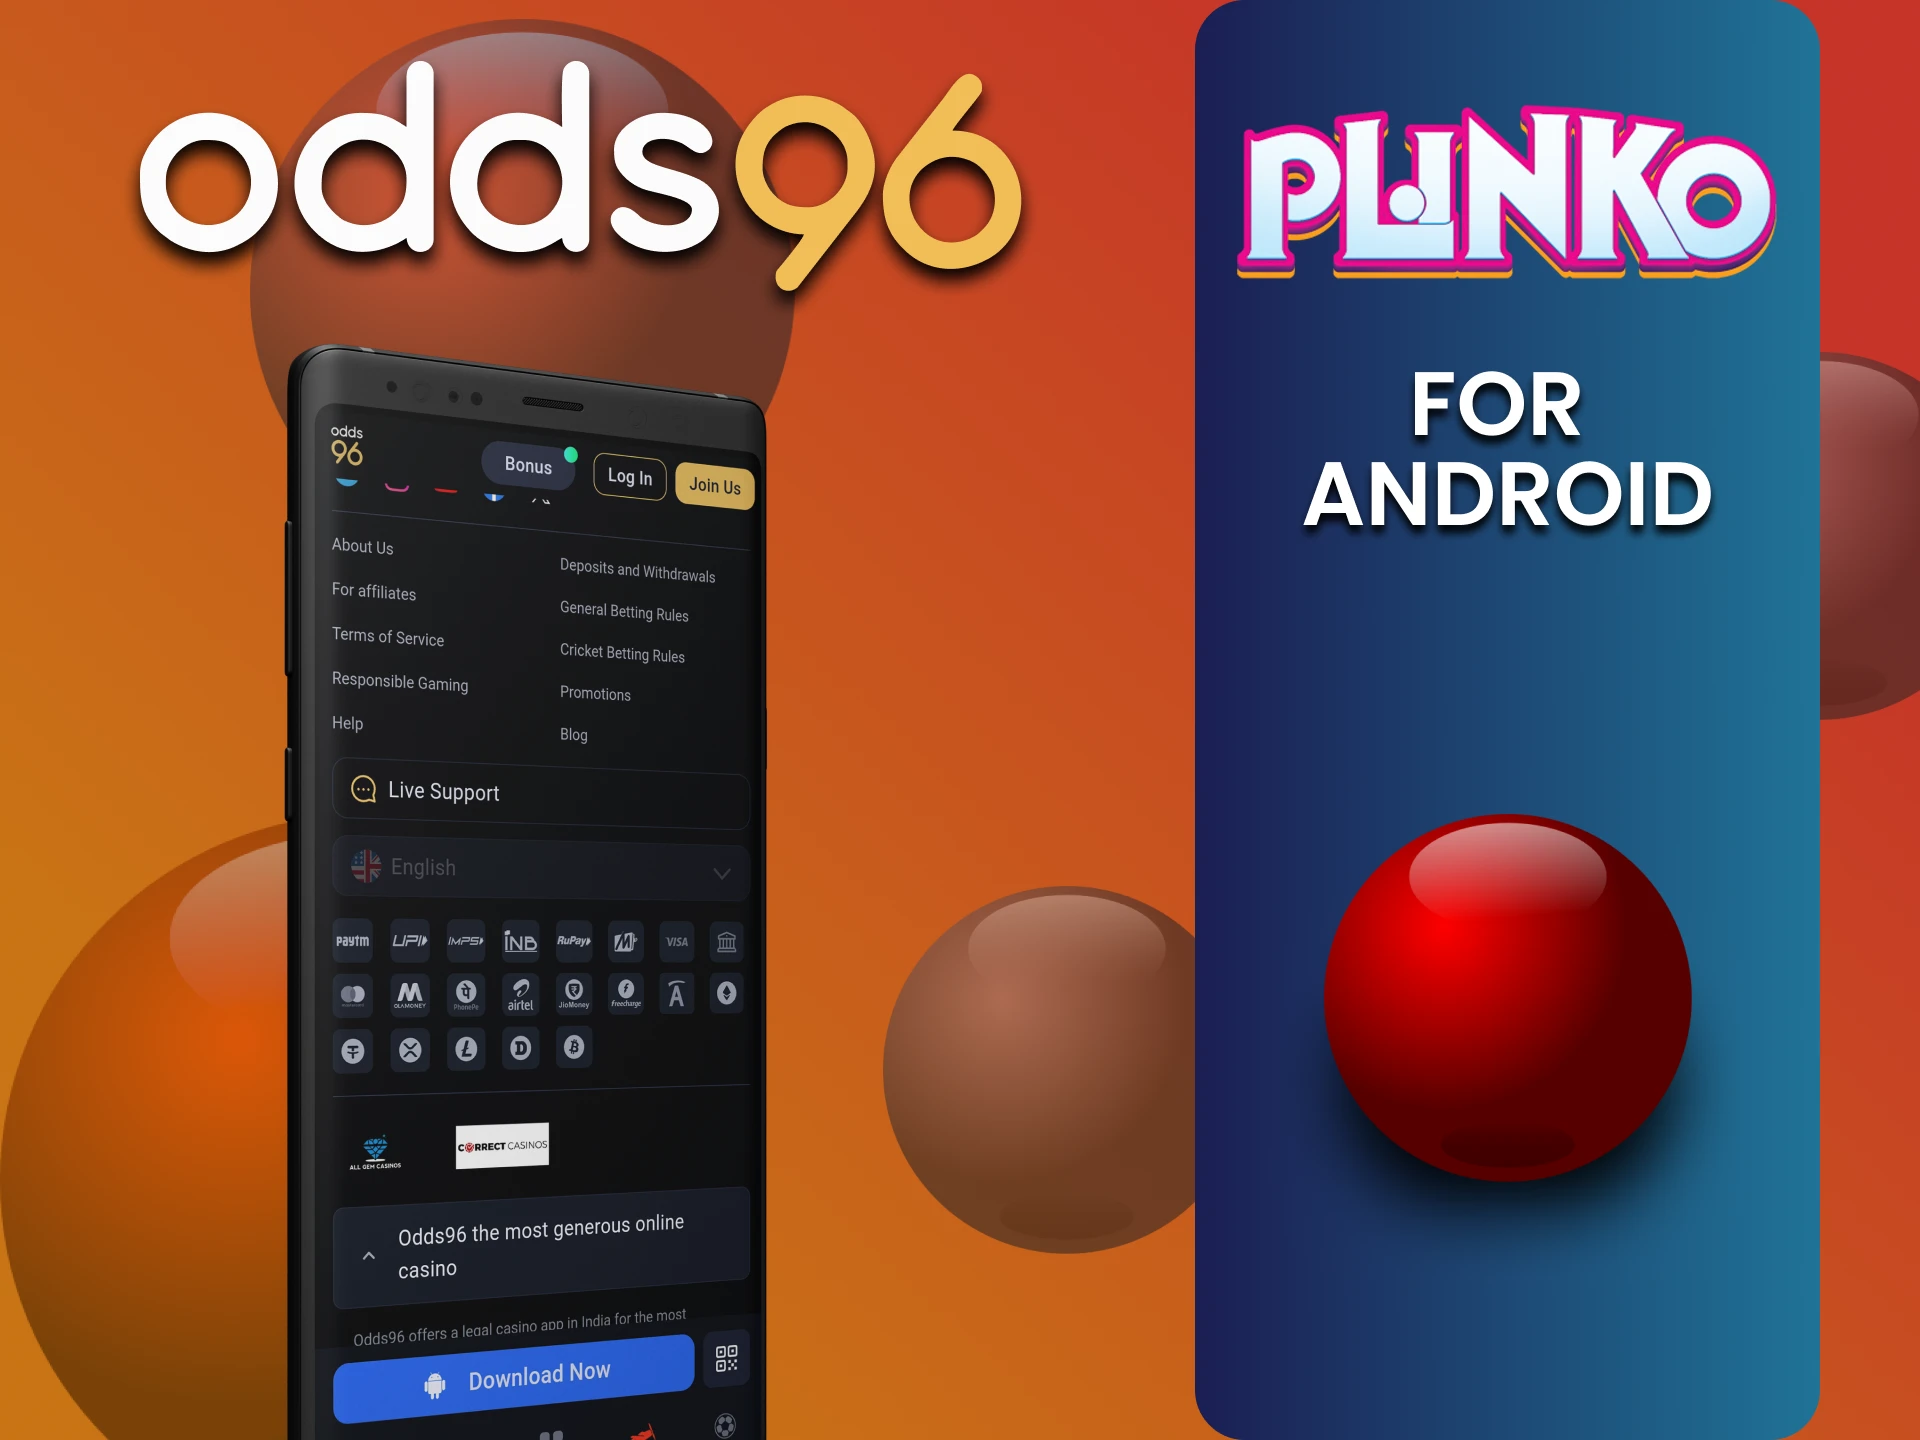 Download the odds96 app for Android to play Plinko.